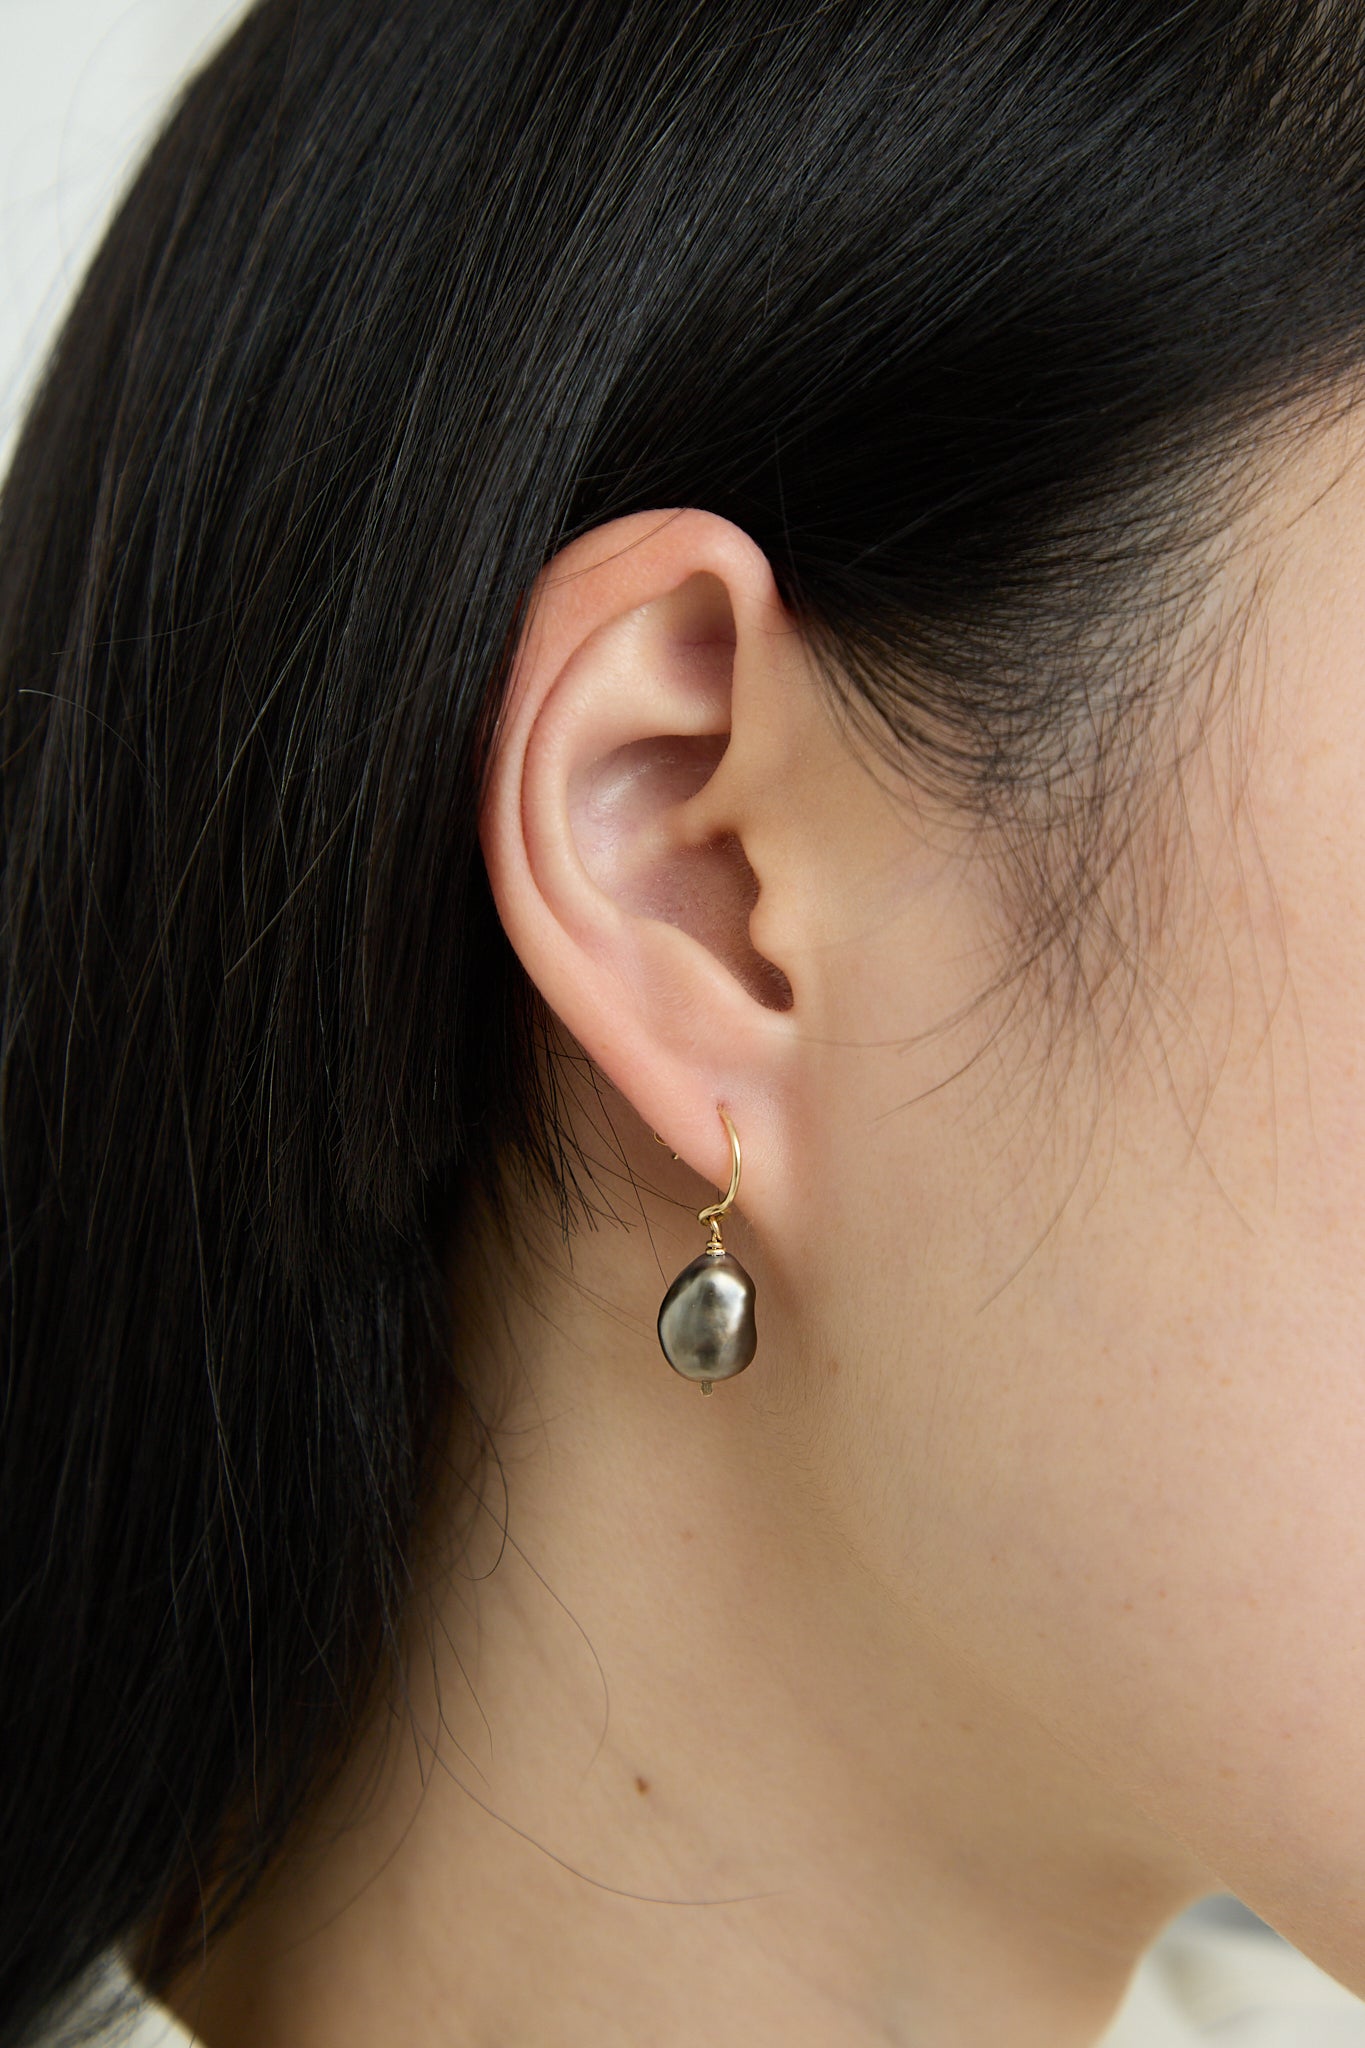 A woman wearing a 14K Crescent Charm Earrings in Grey Keshi Pearl with a black stone dangling from it, made by Mary MacGill. Side view on model. Up close.